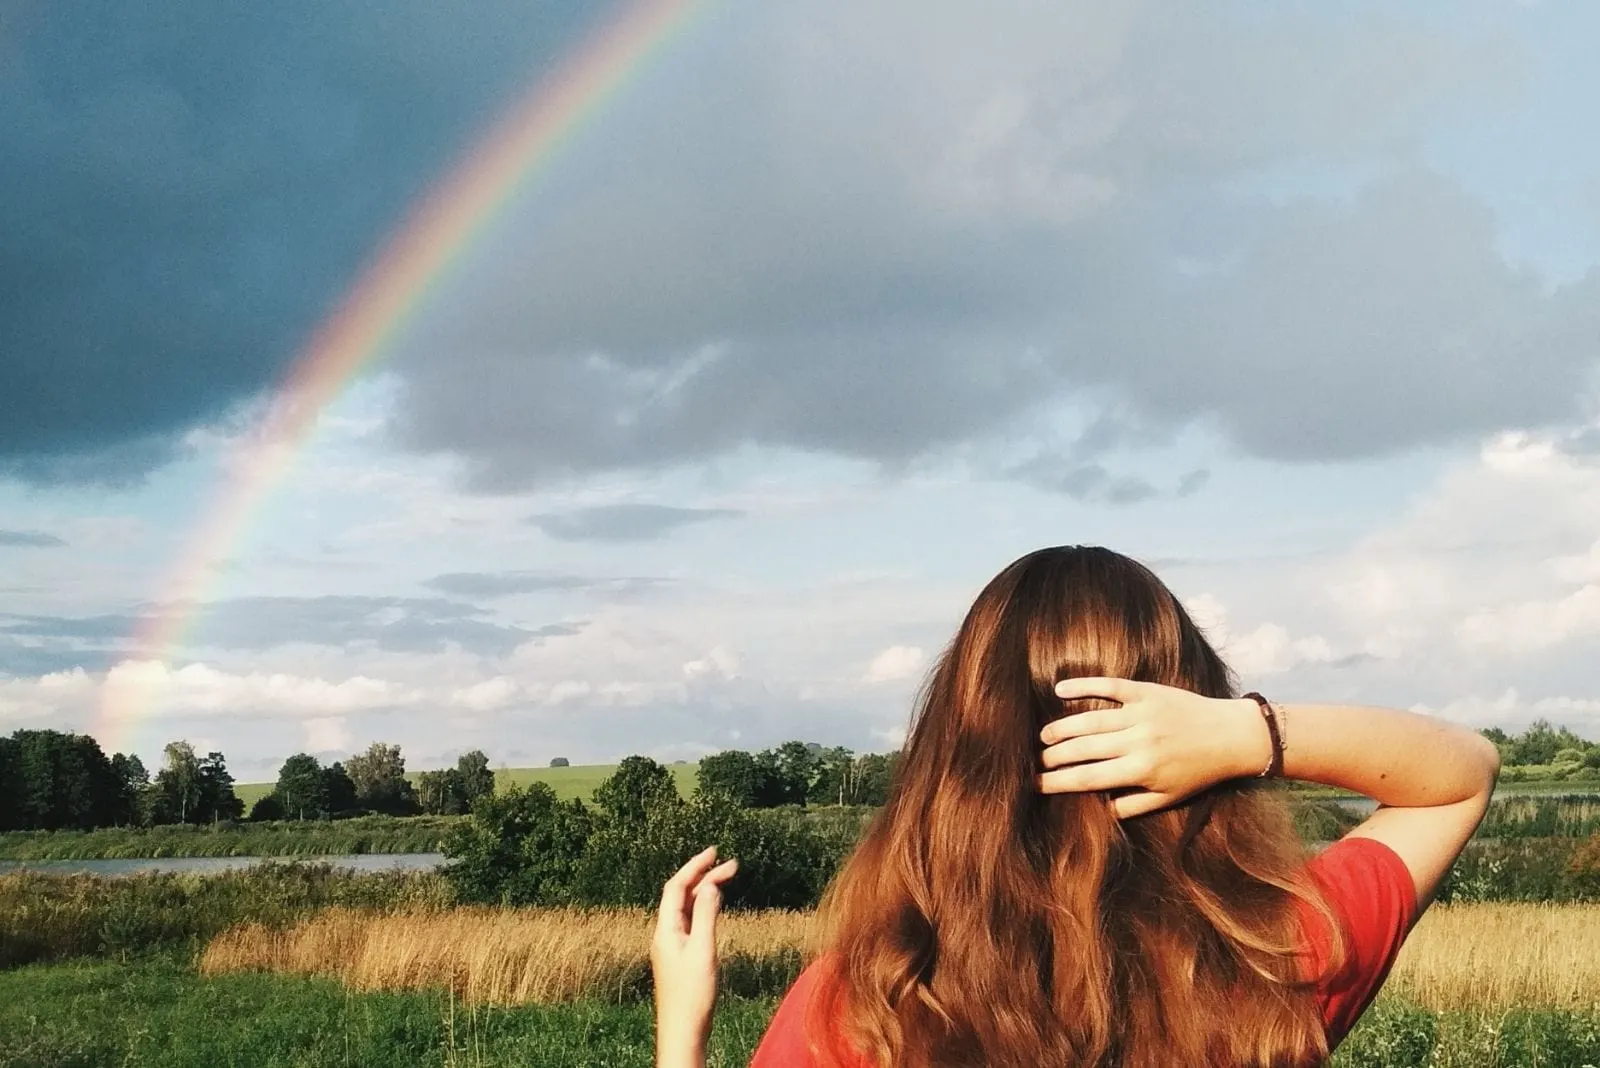 woman looking at the rainbow over the meadows while holding her hair/head